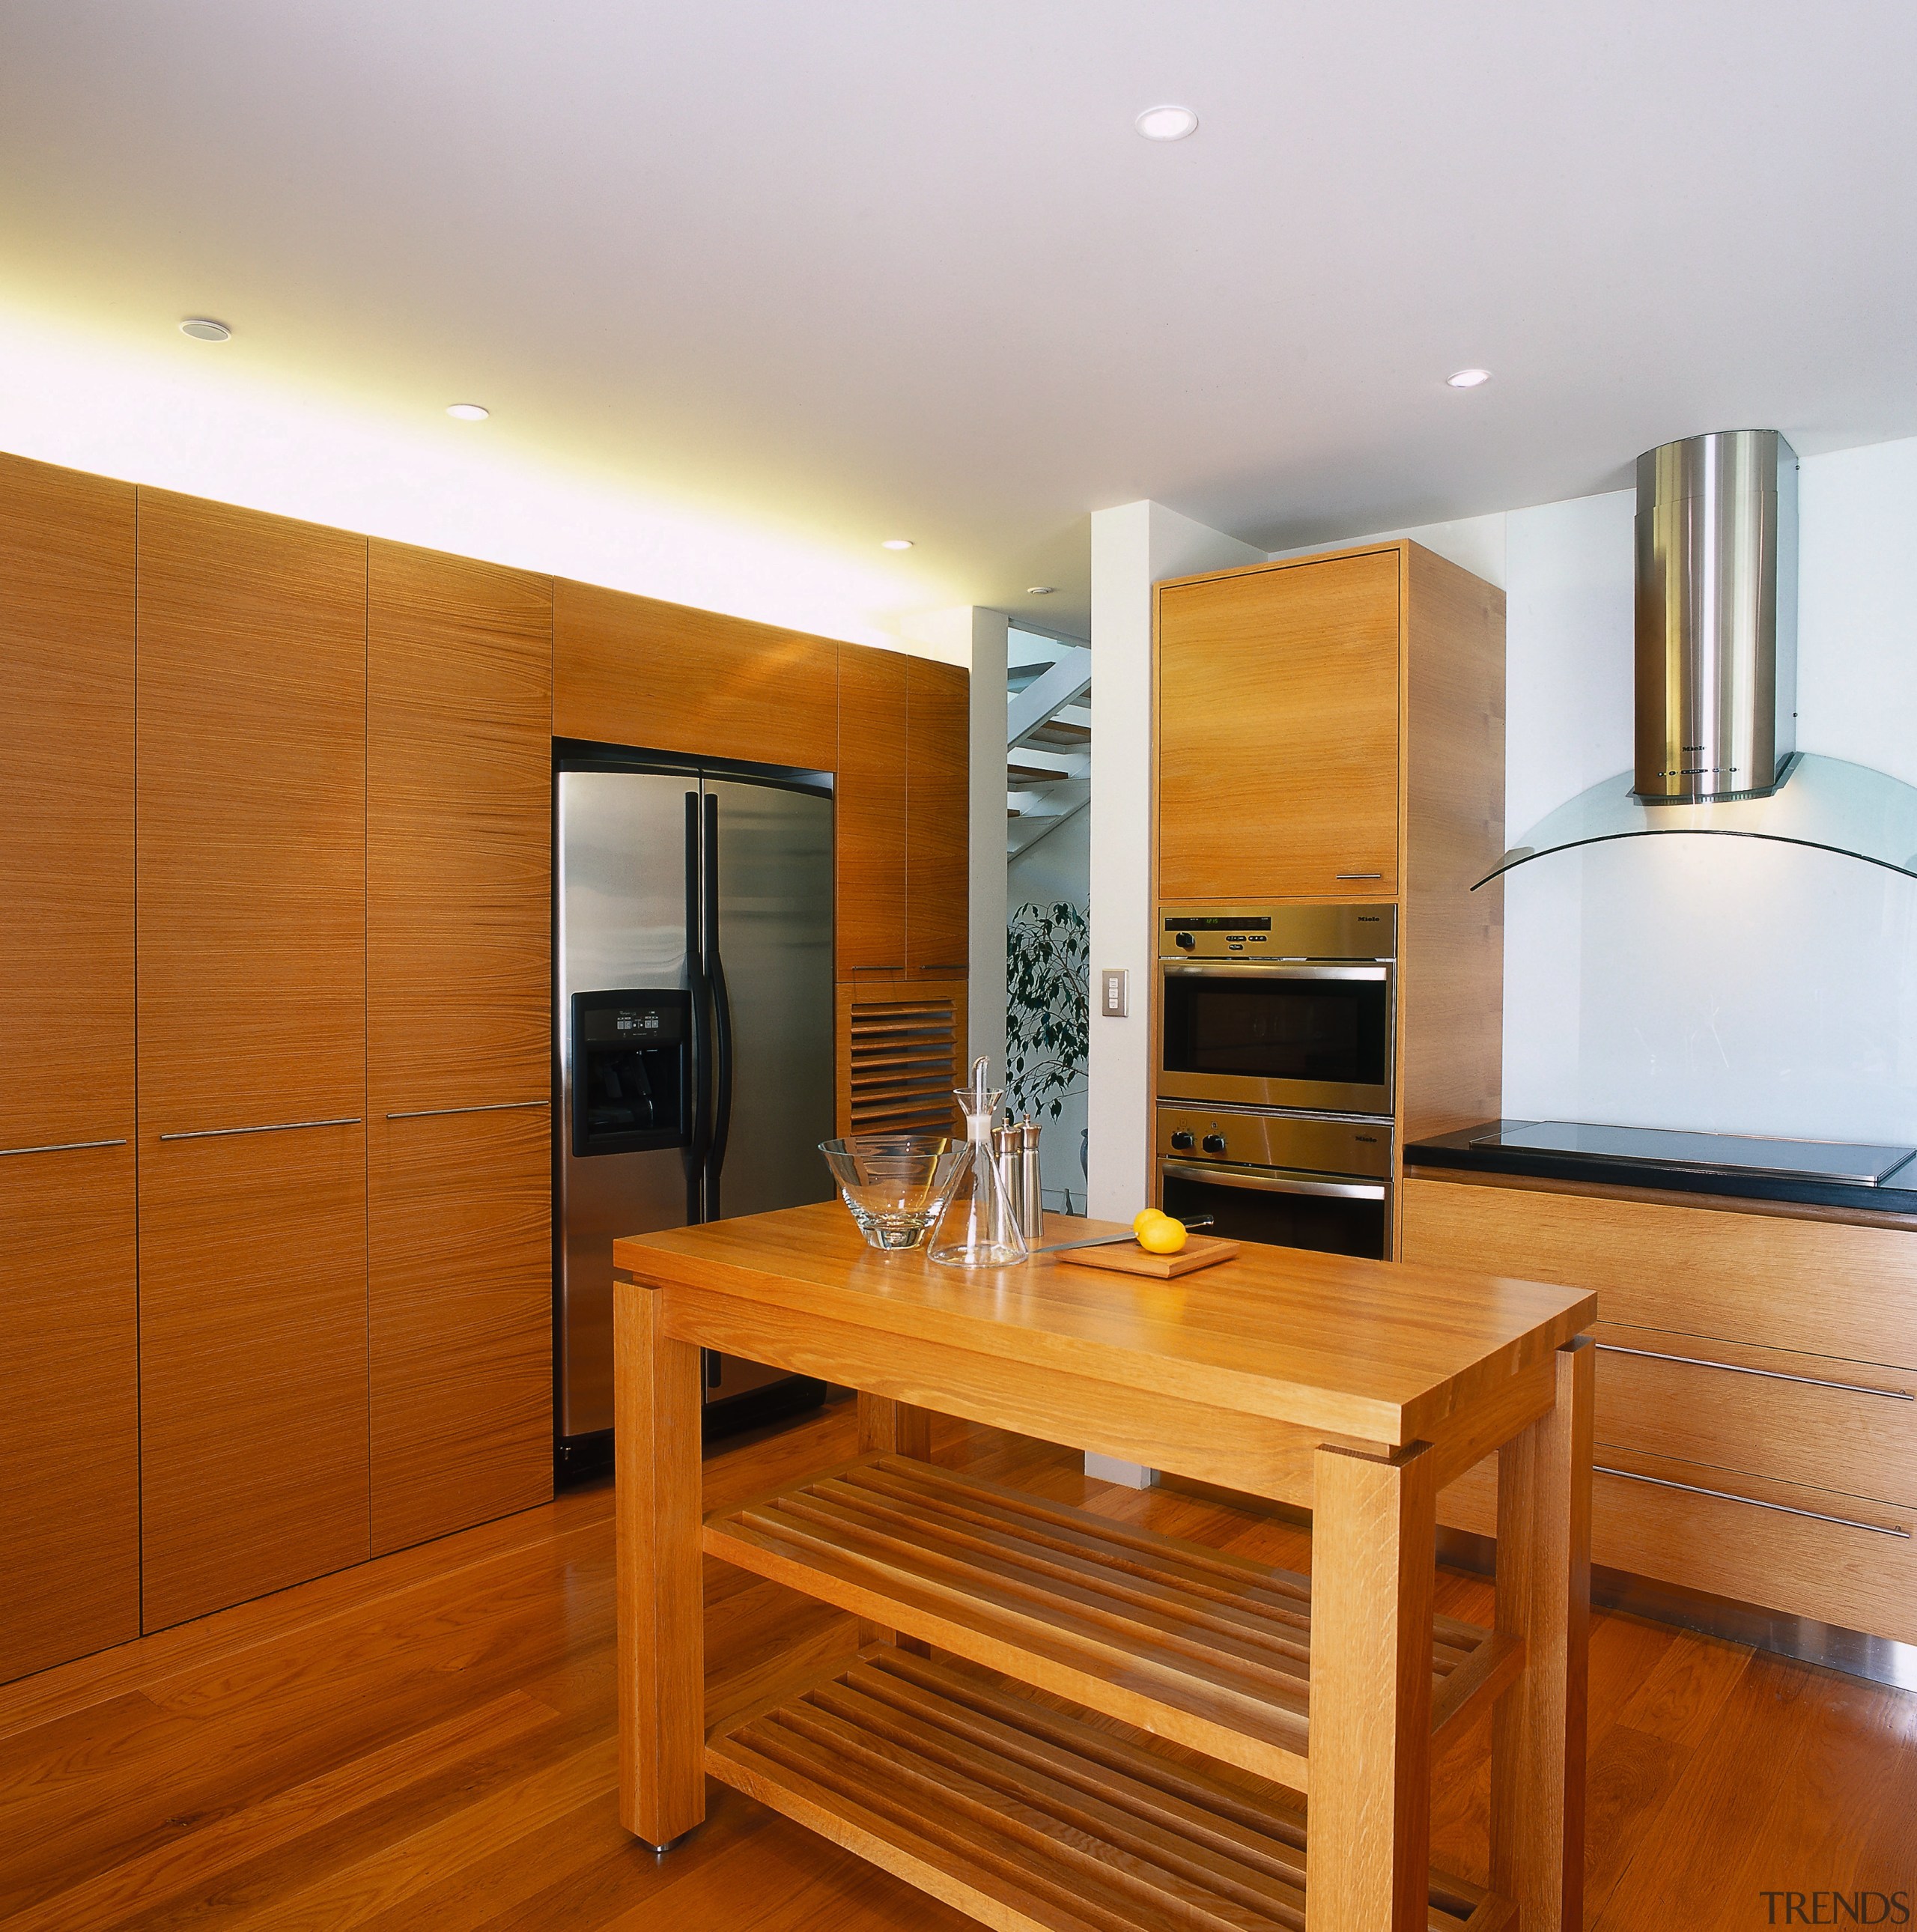 view of the food preparation area showing american floor, interior design, kitchen, real estate, room, wood, brown